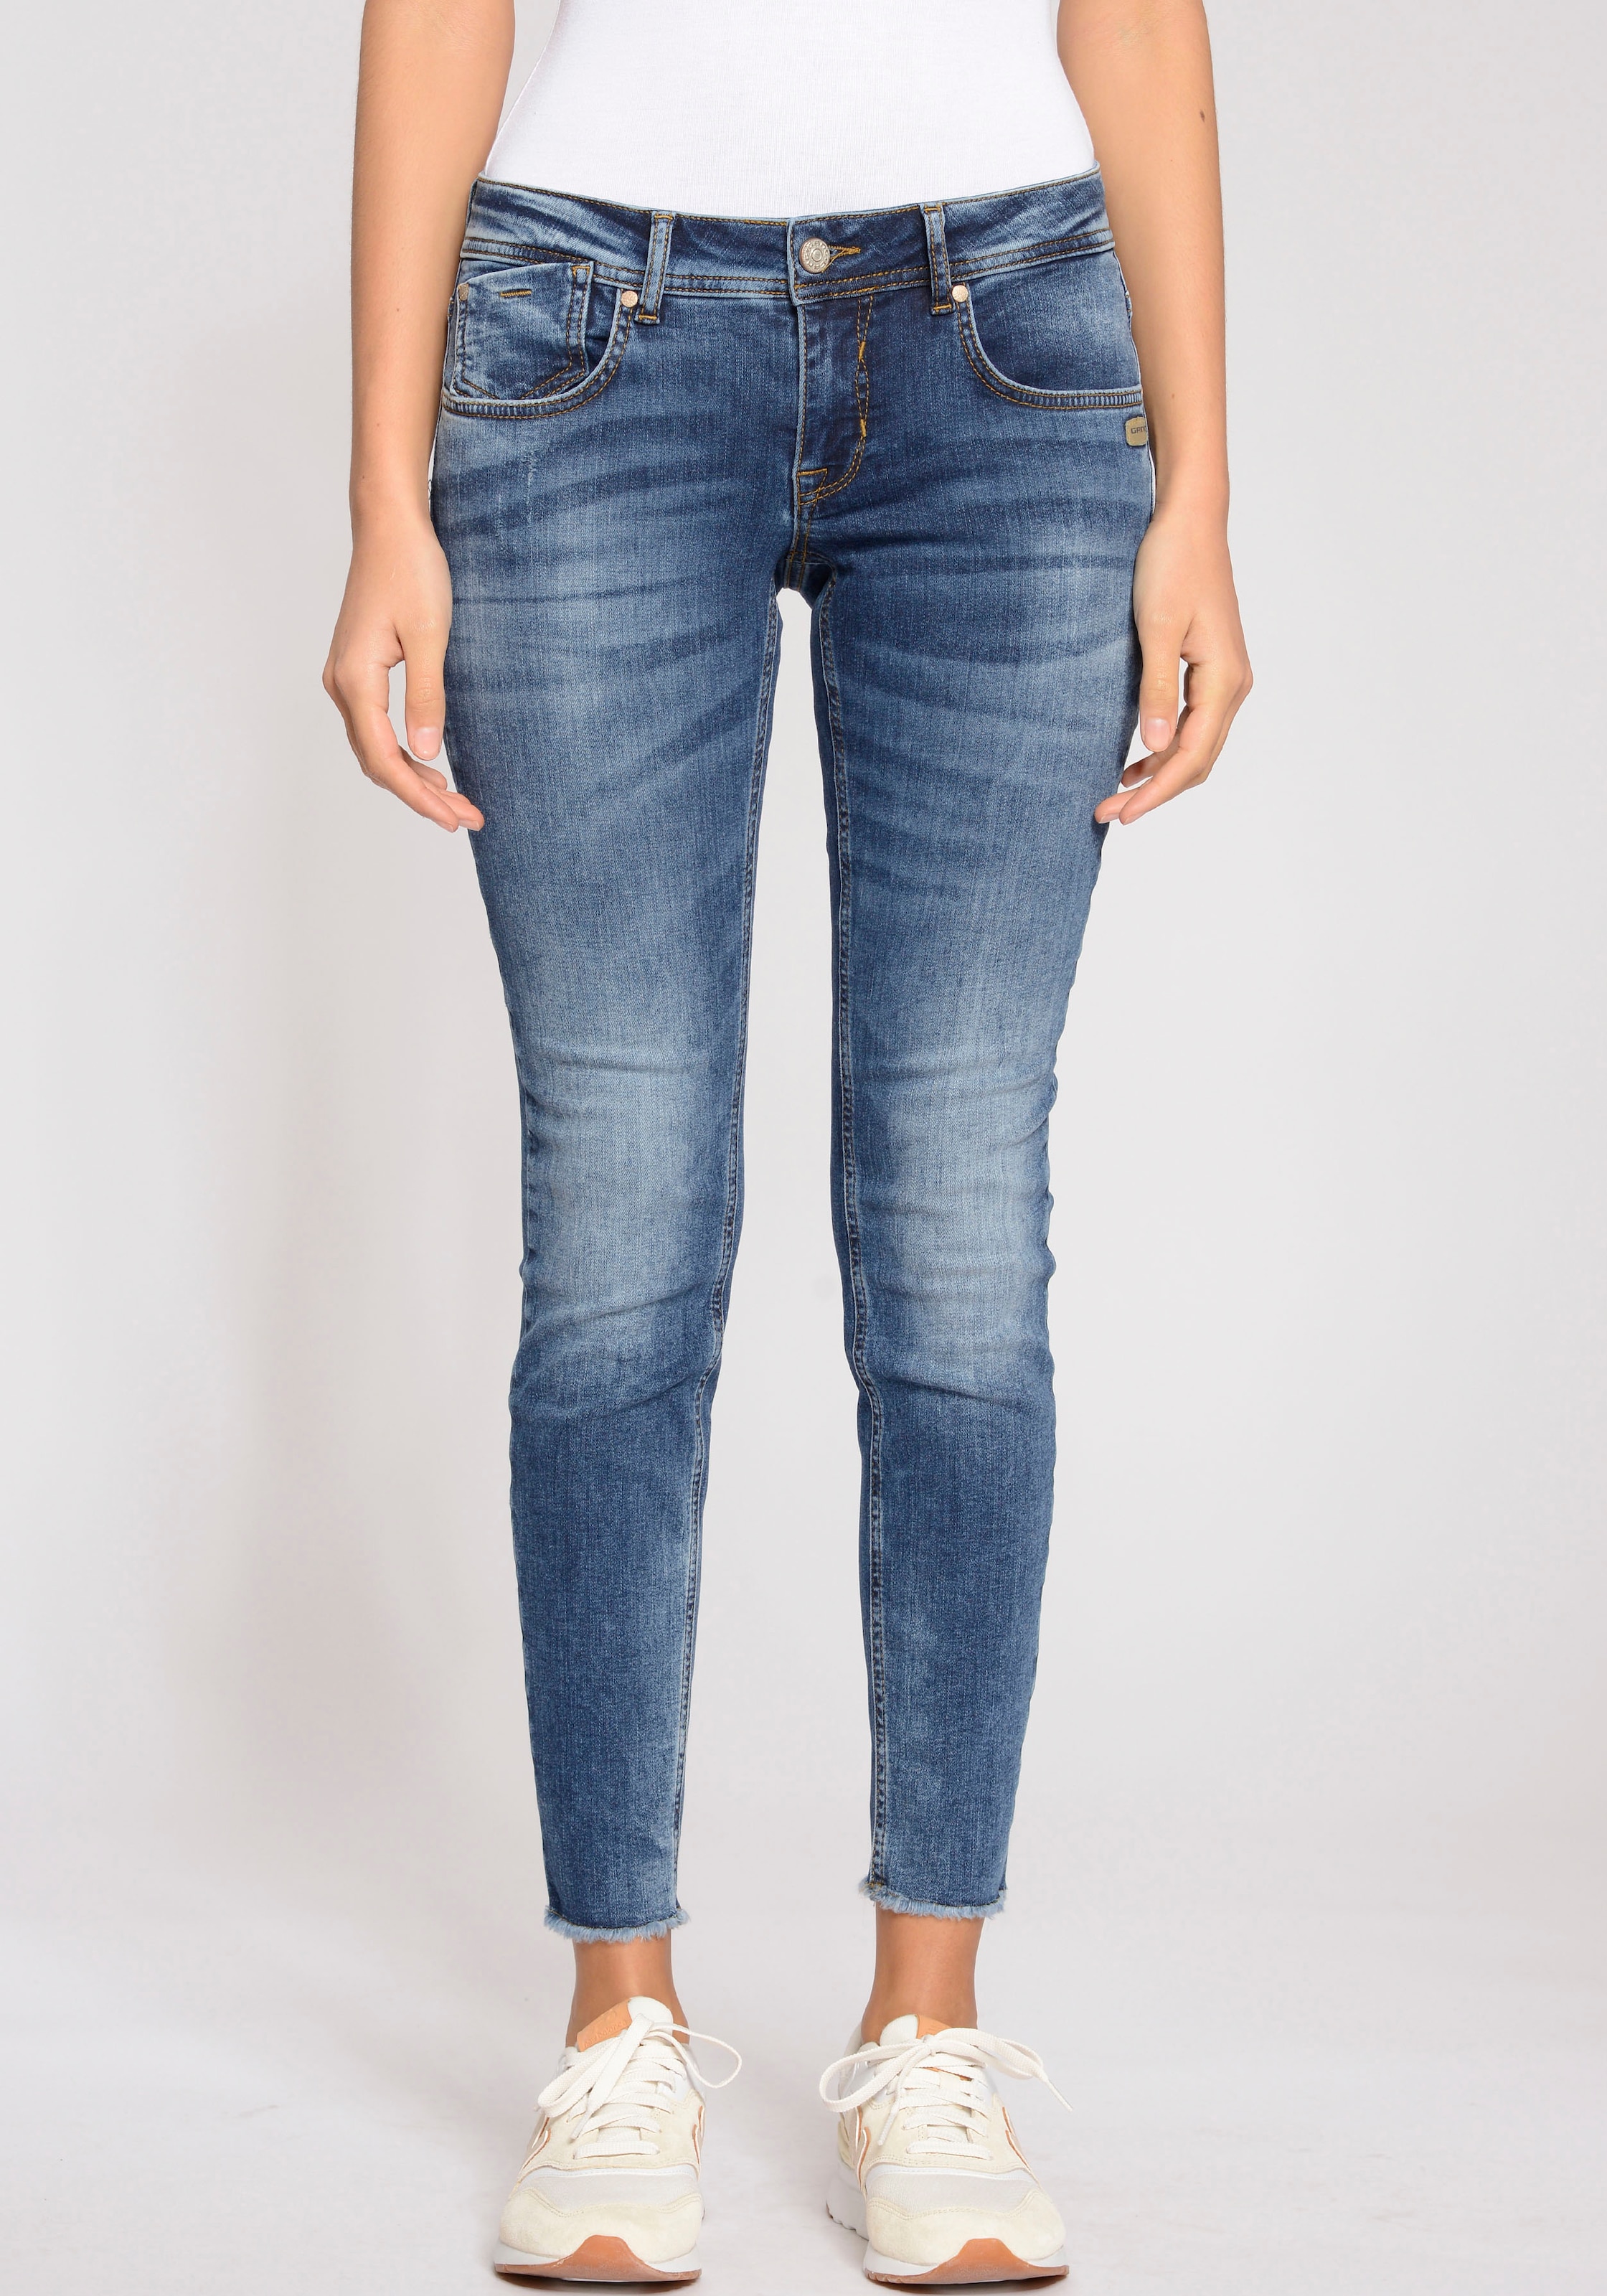 Faye im Shop Online »94 Cropped« OTTO Skinny-fit-Jeans GANG